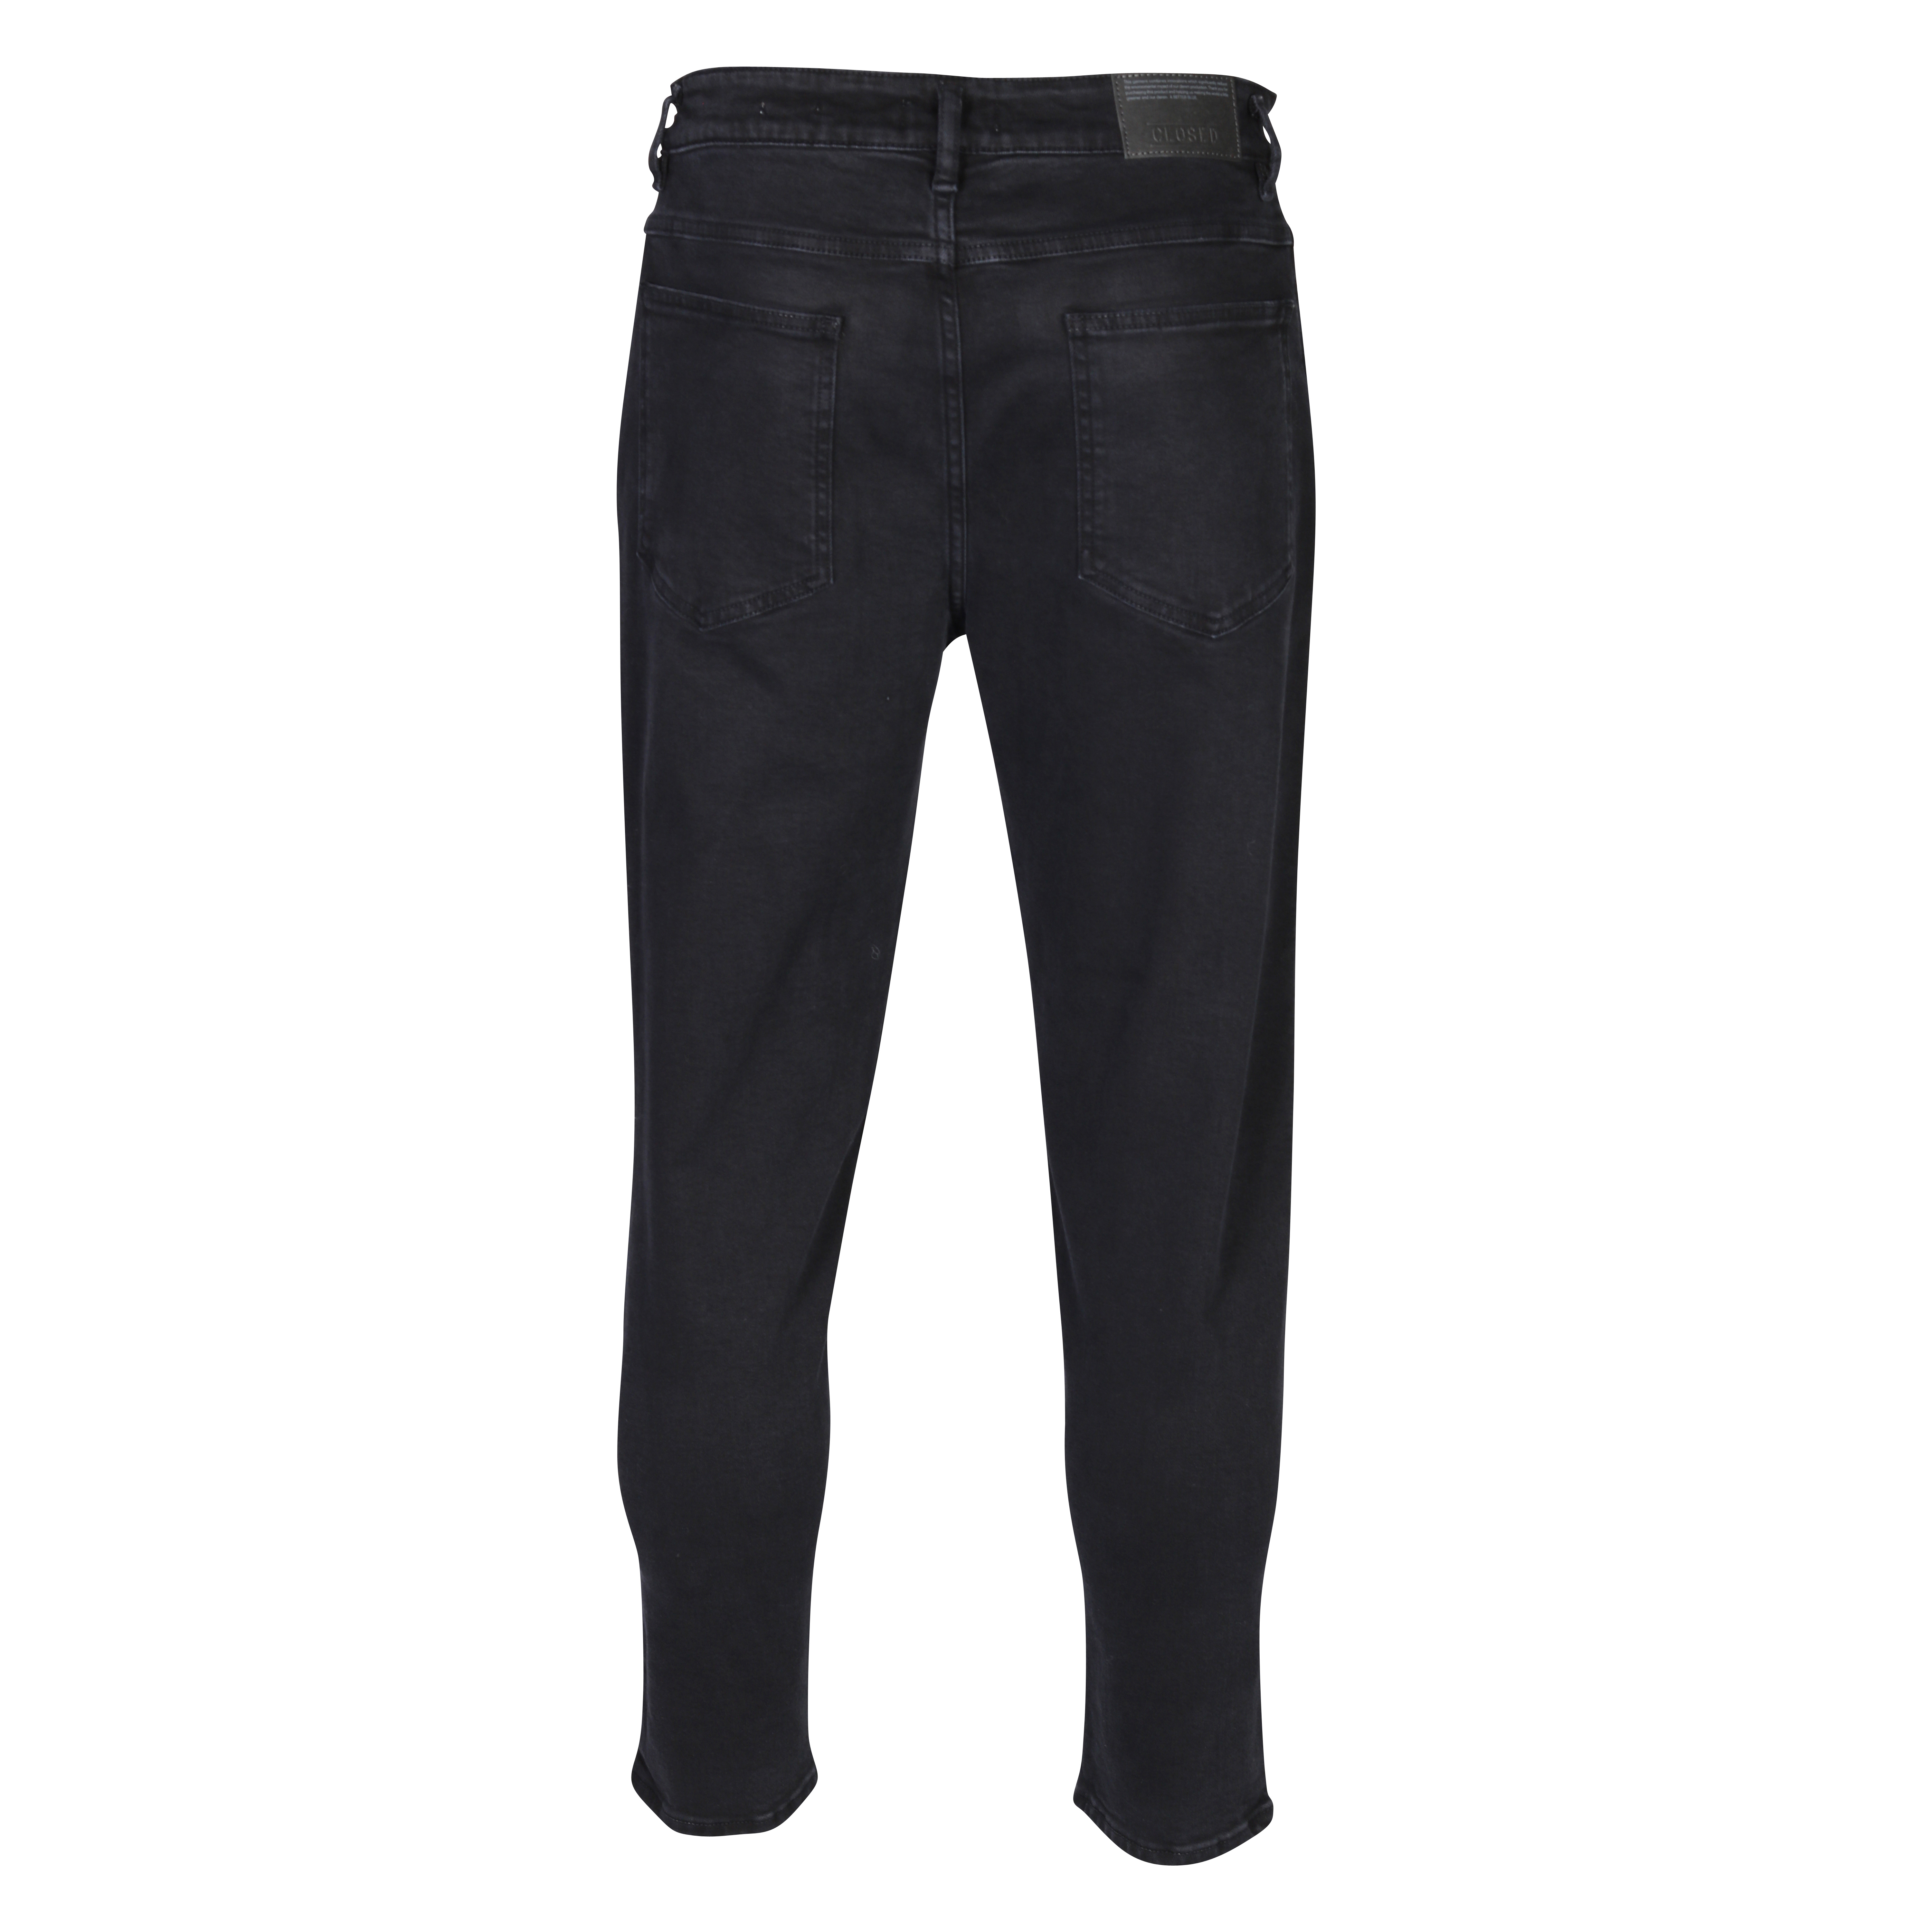 CLOSED X-Lent Tapered Jeans in Black 31